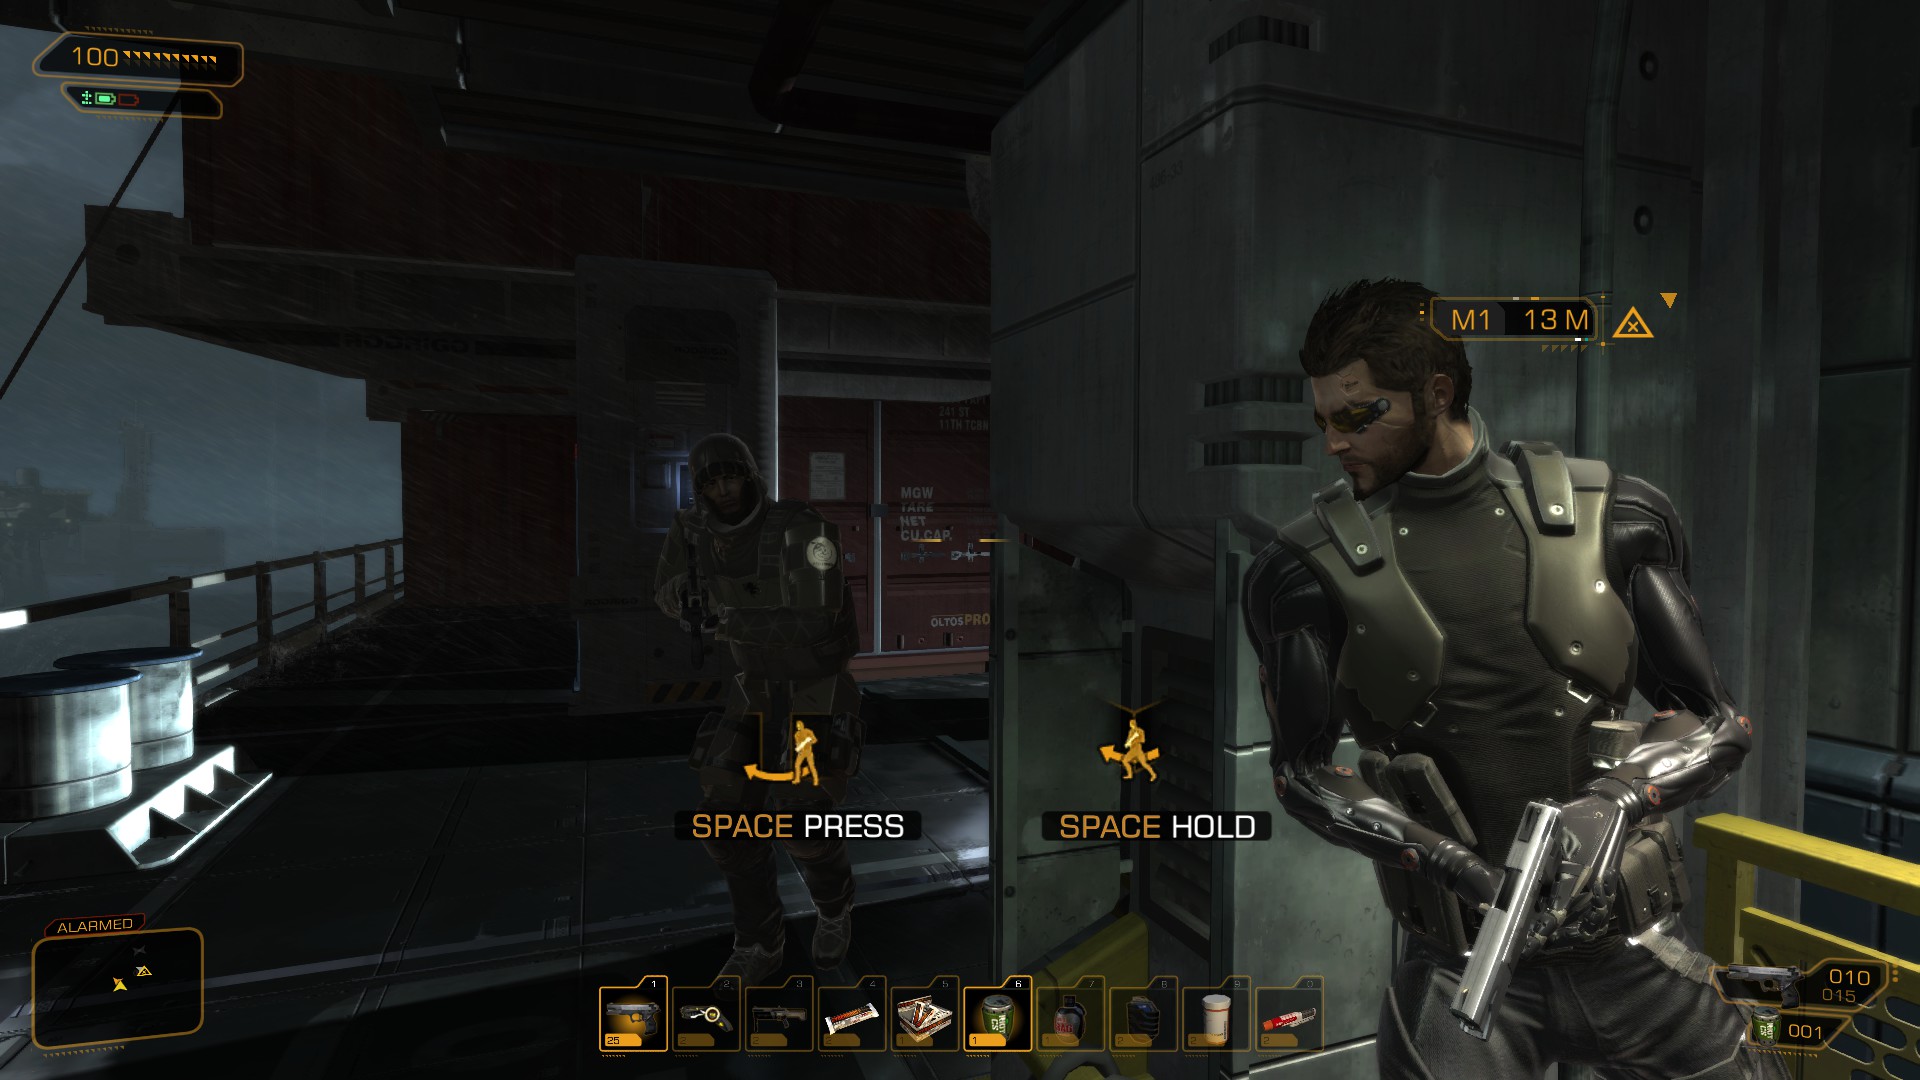 The player waits around a corner for a Belltower soldier